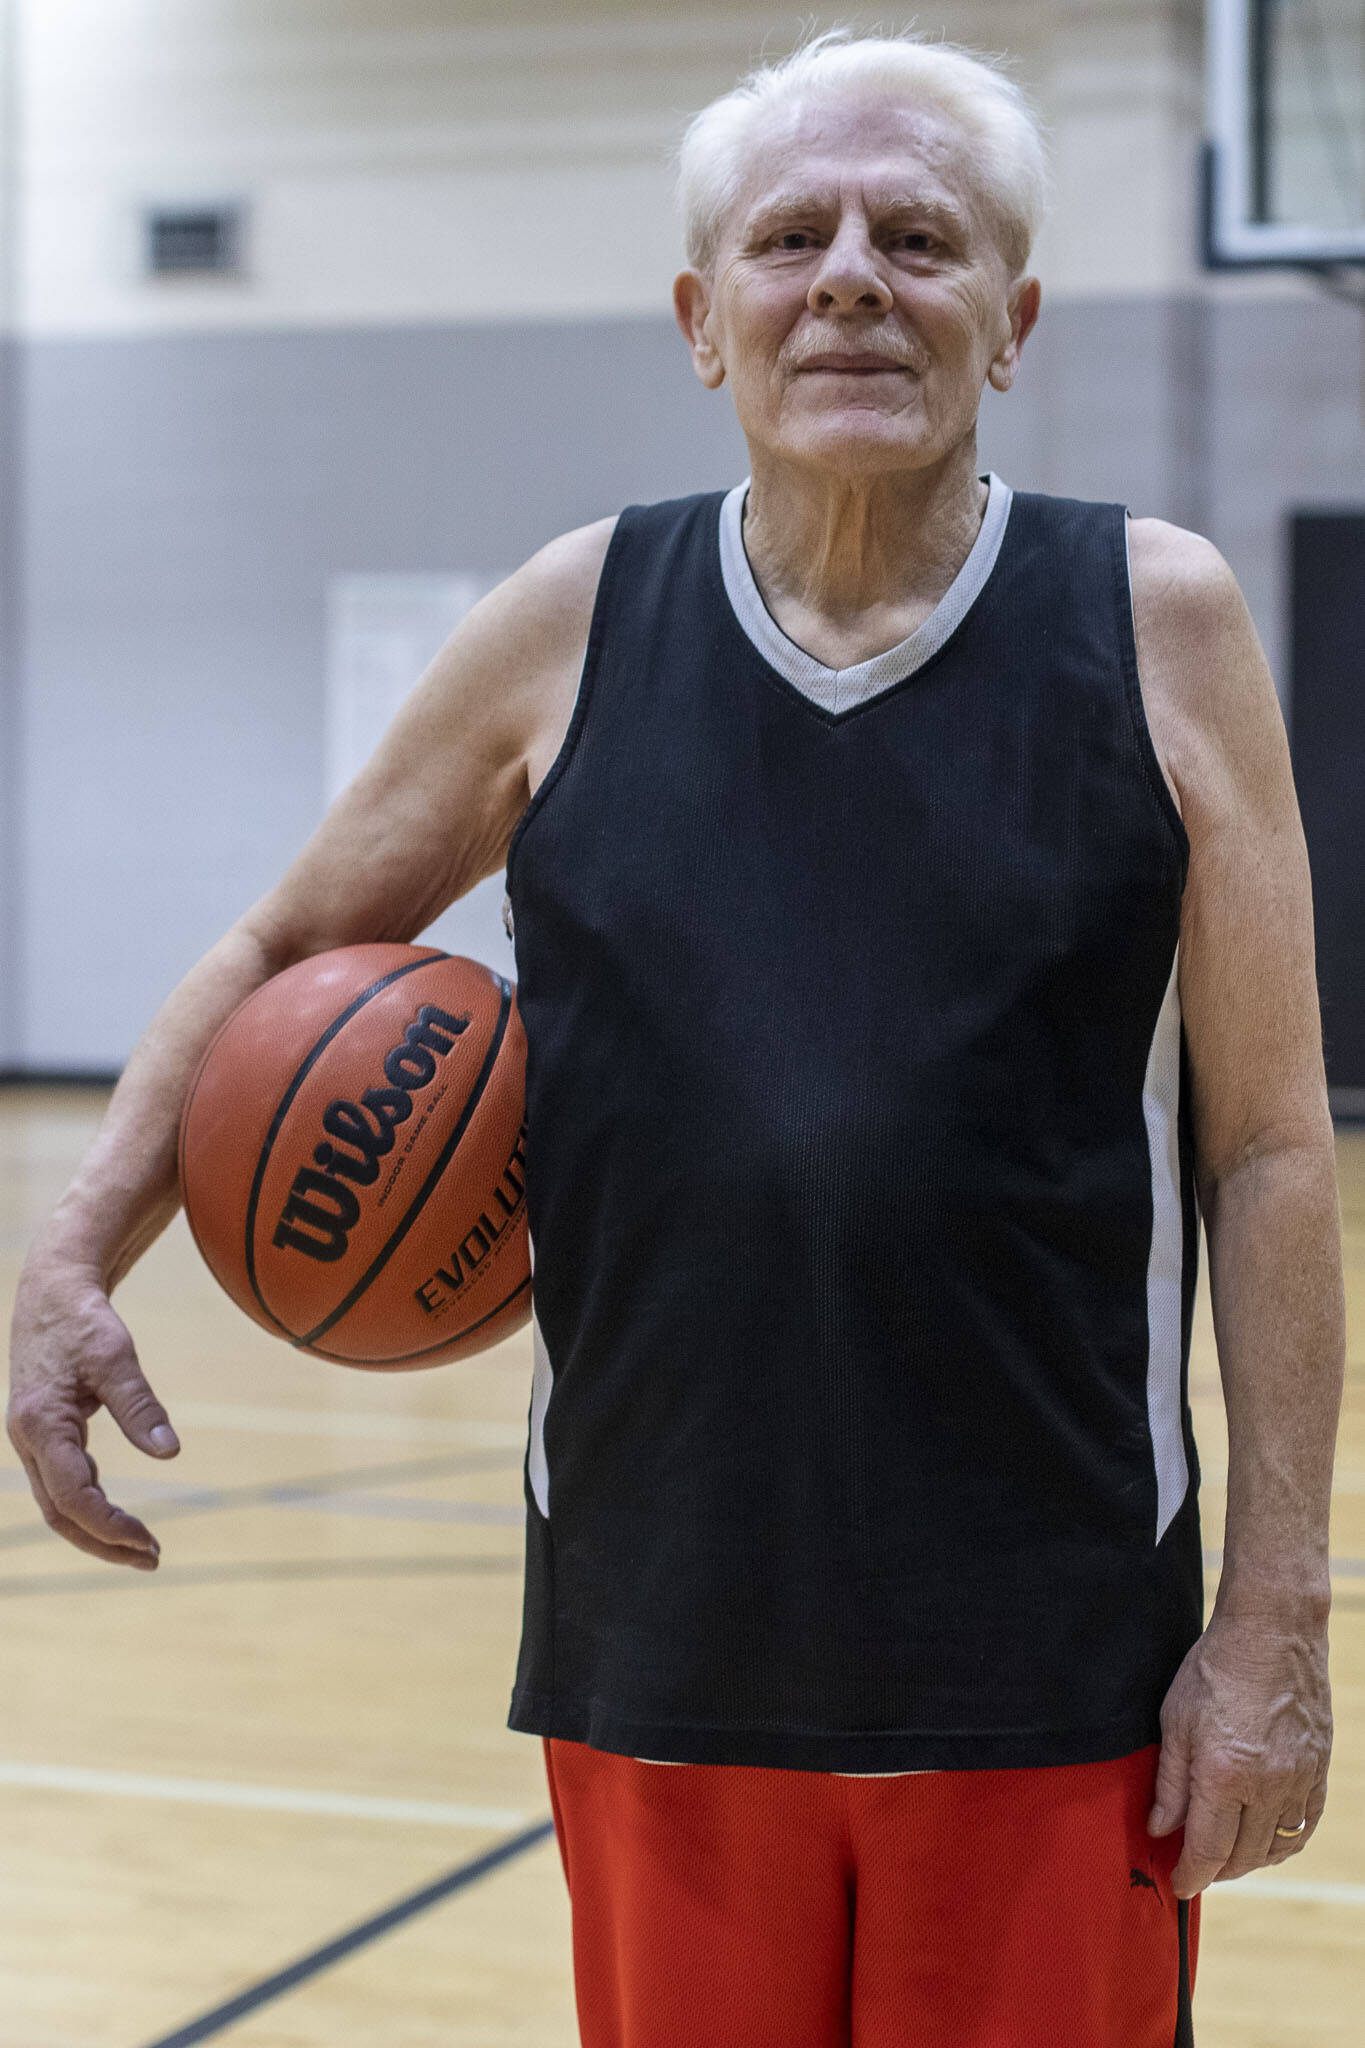 Sal Fonceca, 74, poses for a photo after one of their regular pick-up game of basketball at the Marysville YMCA in Marysville, Washington on Monday, March 13, 2023. (Annie Barker / The Herald)